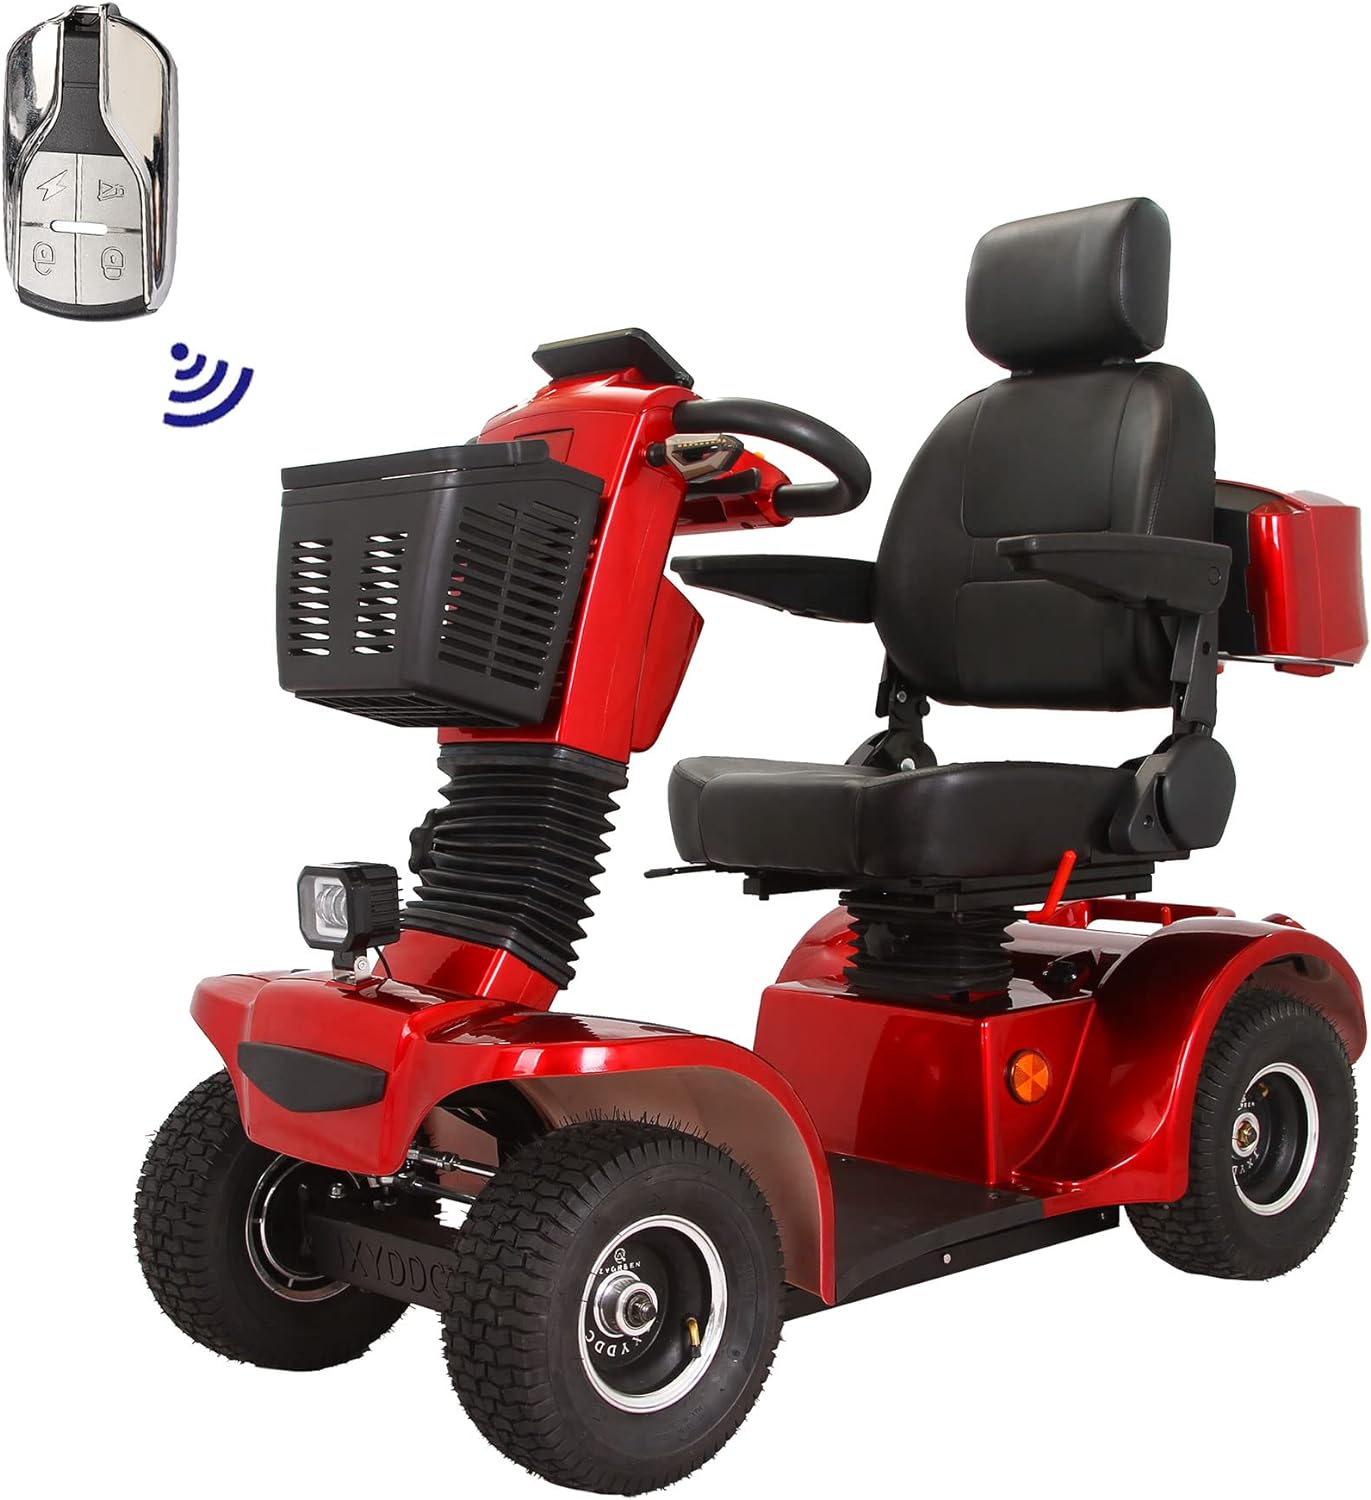 Xmatch Mobility Scooters for Adults & Seniors, Heavy Duty 4-Wheel Medical Electric Powered Wheelchair Device, Elderly-Rear Box 360 Degree Adjustable Seat (Red)